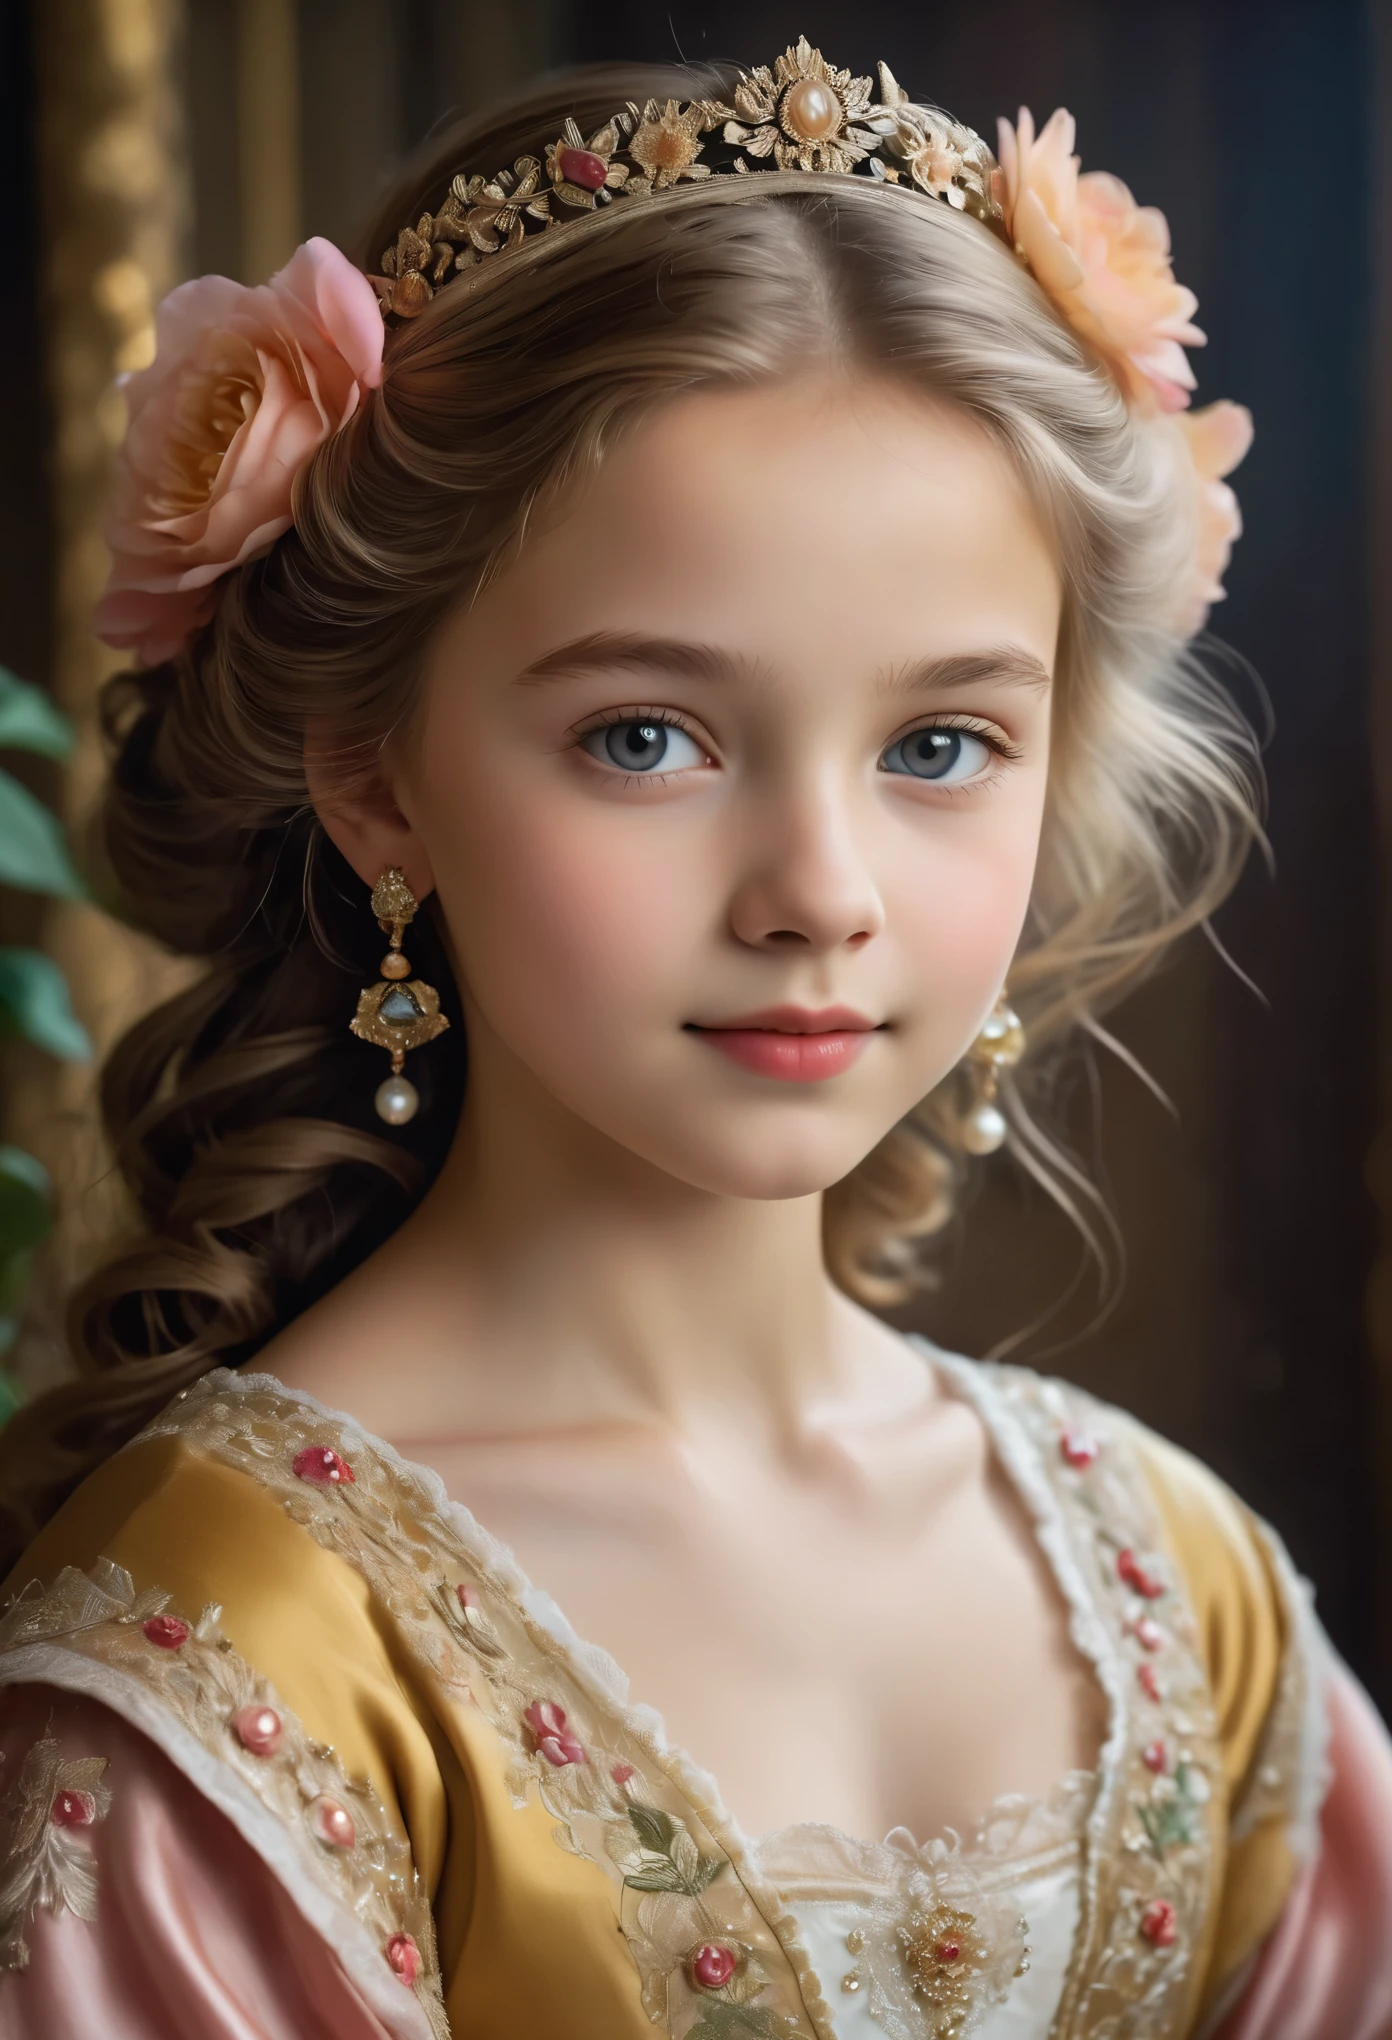 (best quality,4k,8k,highres,masterpiece:1.2), ultra-detailed, (realistic,photorealistic,photo-realistic:1.37),In the portrait of this enchanting 14-year-old girl, the daughter of a prosperous merchant during the flourishing 17th century in the Netherlands, every brushstroke captures the essence of her youth and innocence.

Her golden locks cascade in gentle waves, adorned with ribbons and pearls that speak of her family's affluence. Each curl seems to dance in the light, framing her cherubic face with an air of purity and grace. Her eyes, wide and bright, reflect the curiosity and wonder of childhood, as if every glance is filled with endless possibilities.

Her rosy cheeks flush with vitality, a testament to her health and happiness in the embrace of her privileged upbringing. A delicate dimple graces her smile, adding a touch of sweetness to her countenance that is as charming as it is captivating.

Dressed in the finest silks and lace, her gown whispers softly with every movement, a symphony of luxury and refinement. Embroidered motifs and intricate details adorn her attire, showcasing the exquisite craftsmanship of the era and her family's esteemed status in society.

In her hands, she holds a posy of fresh flowers, their vibrant colors mirroring the bloom of her youth. With each delicate petal, she seems to embody the essence of spring itself, a beacon of hope and renewal in a world filled with uncertainty.

This portrait of the 14-year-old daughter of a prosperous Dutch merchant is not just a representation of beauty; it's a window into a bygone era of elegance, privilege, and the timeless innocence of youth.